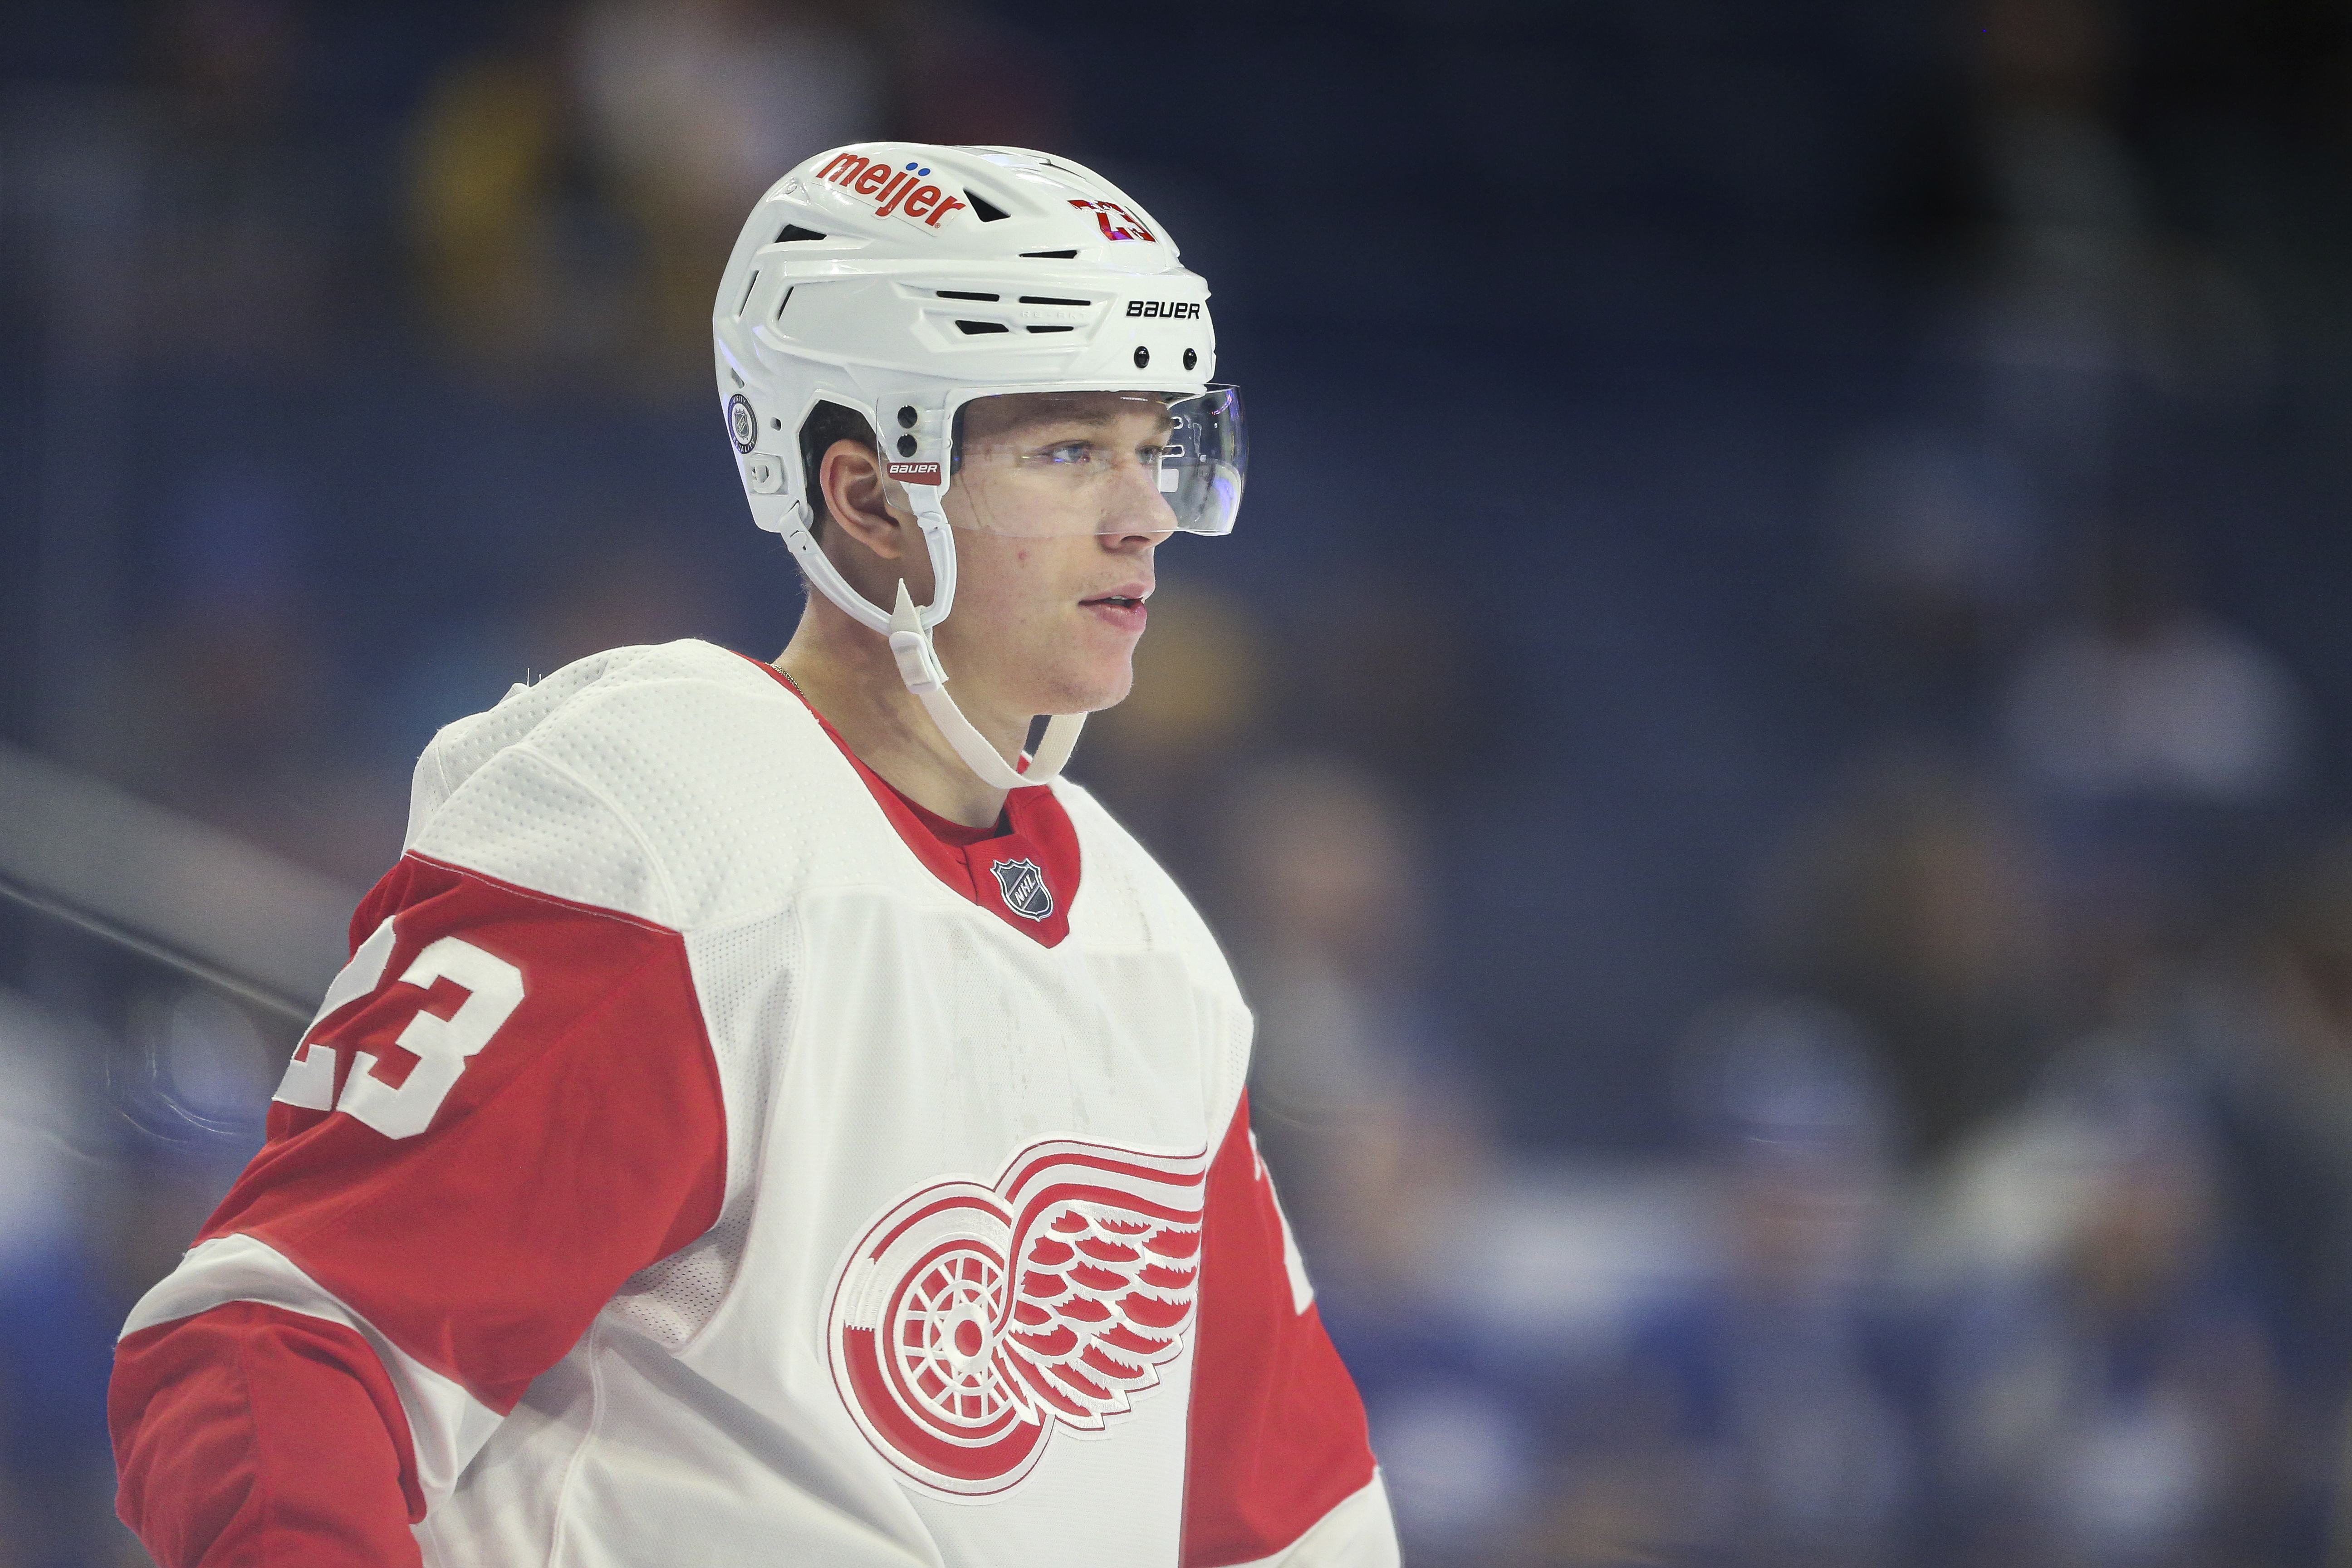 No 2022 All-Star Game for Detroit Red Wings' Lucas Raymond